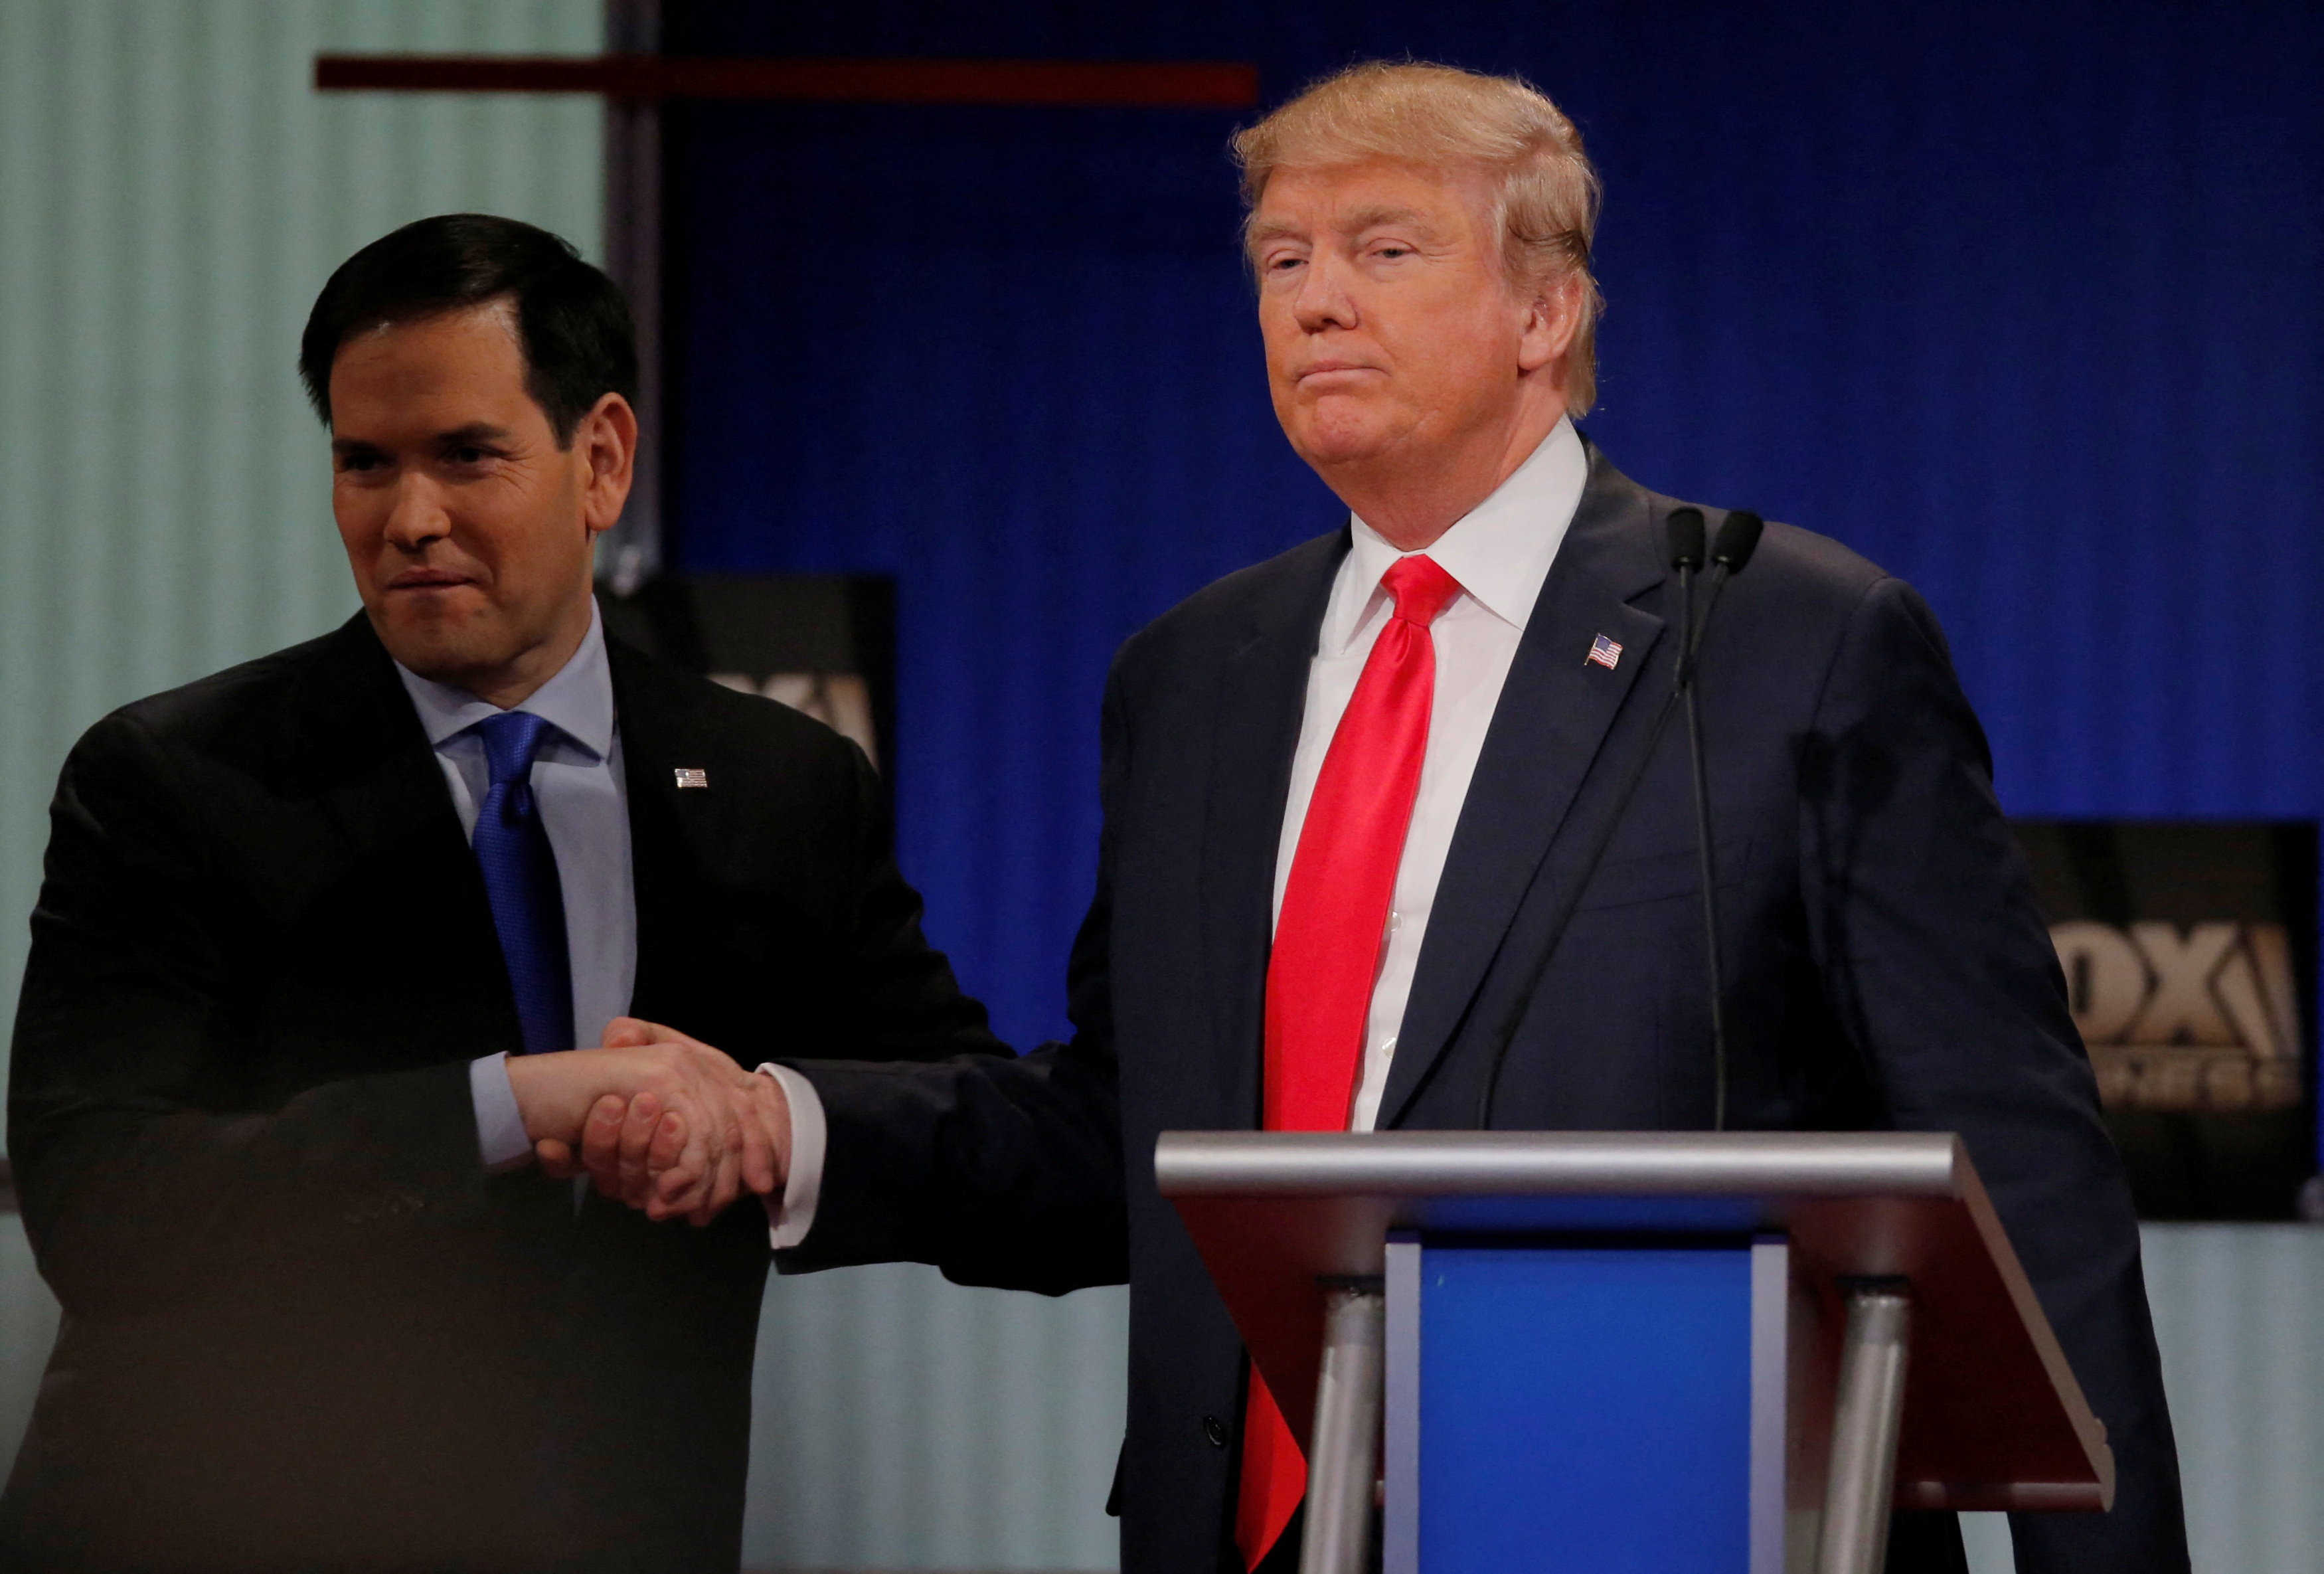 Republican U.S. presidential candidate Rubio shakes hands with rival candidate Trump at the conclusion of the Fox Business Network Republican presidential candidates debate in North Charleston